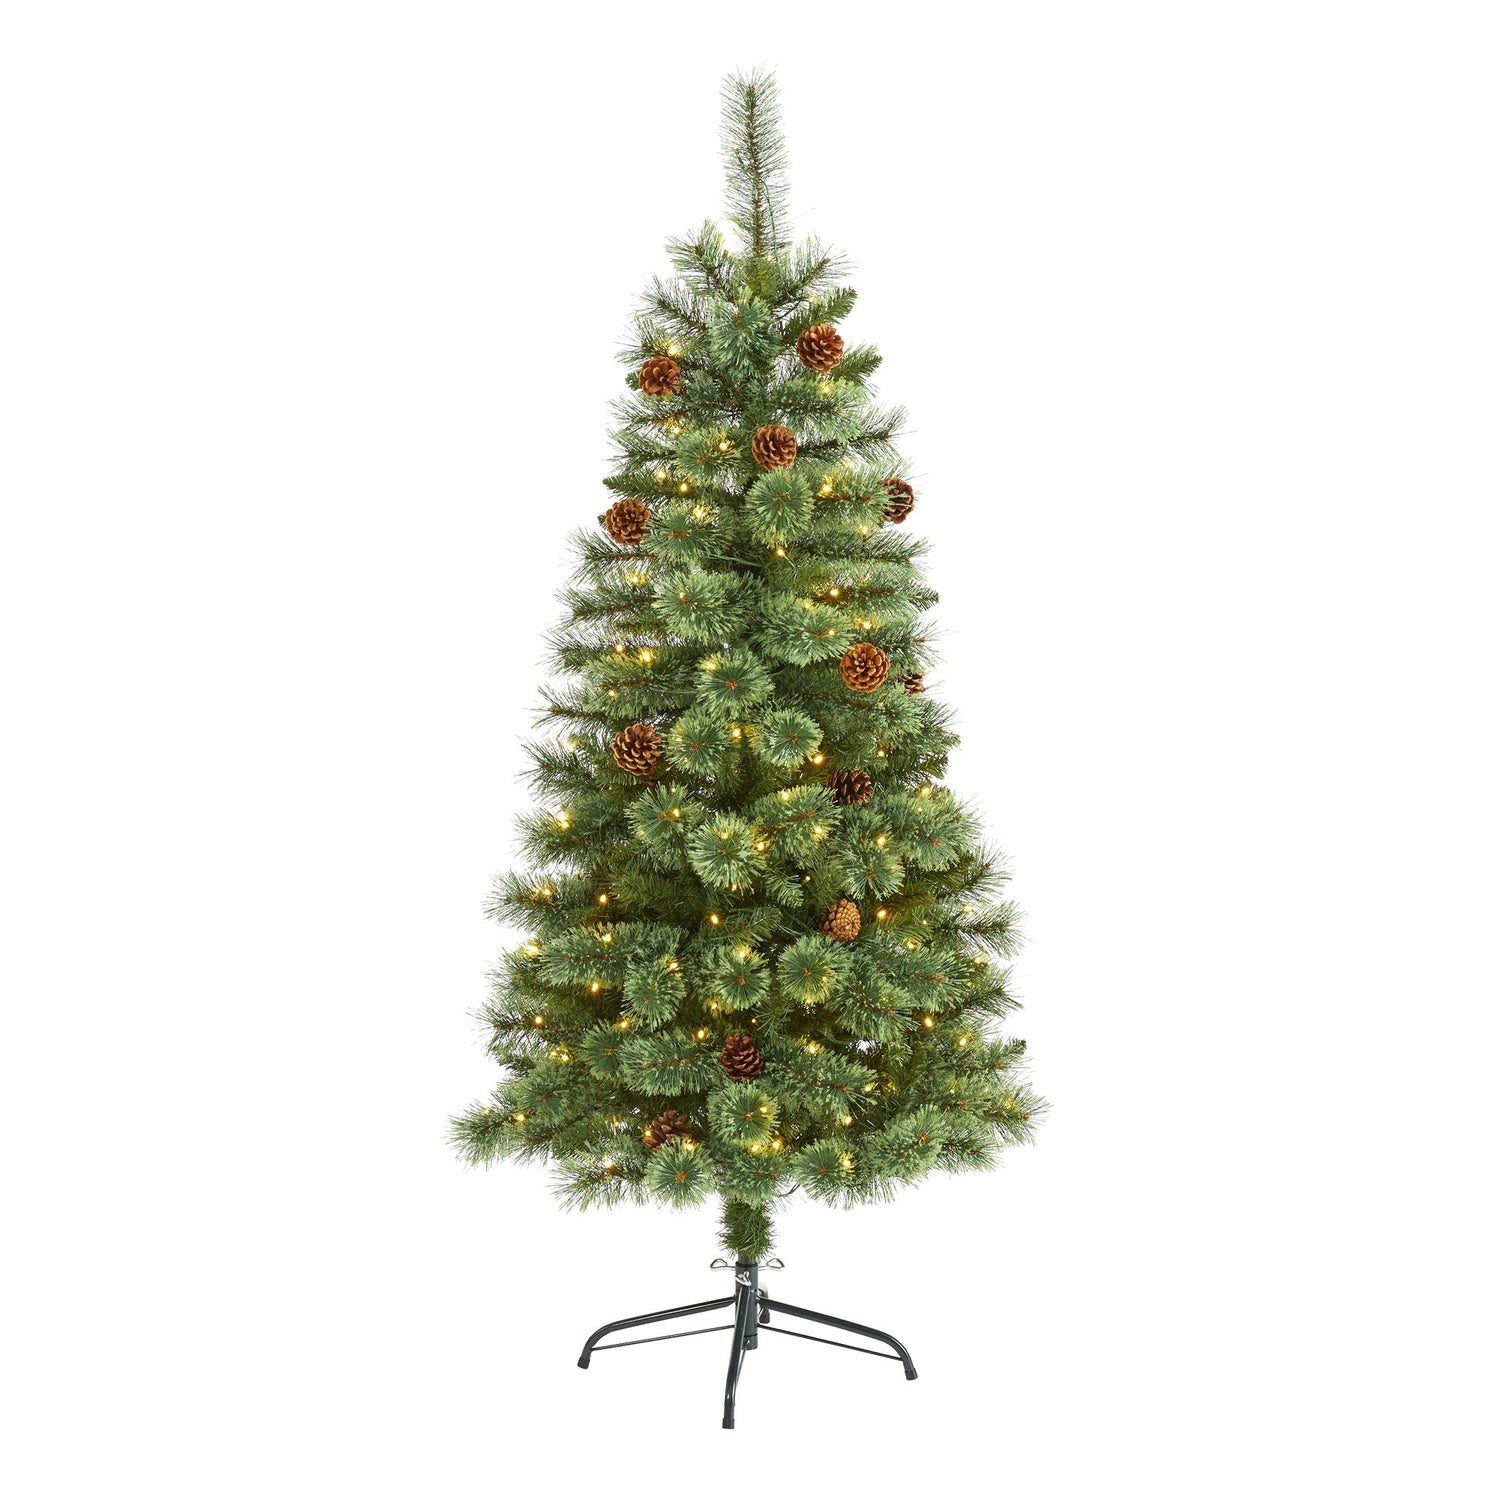 5’ White Mountain Pine Artificial Christmas Tree with 200 Clear LED Lights and Pine Cones